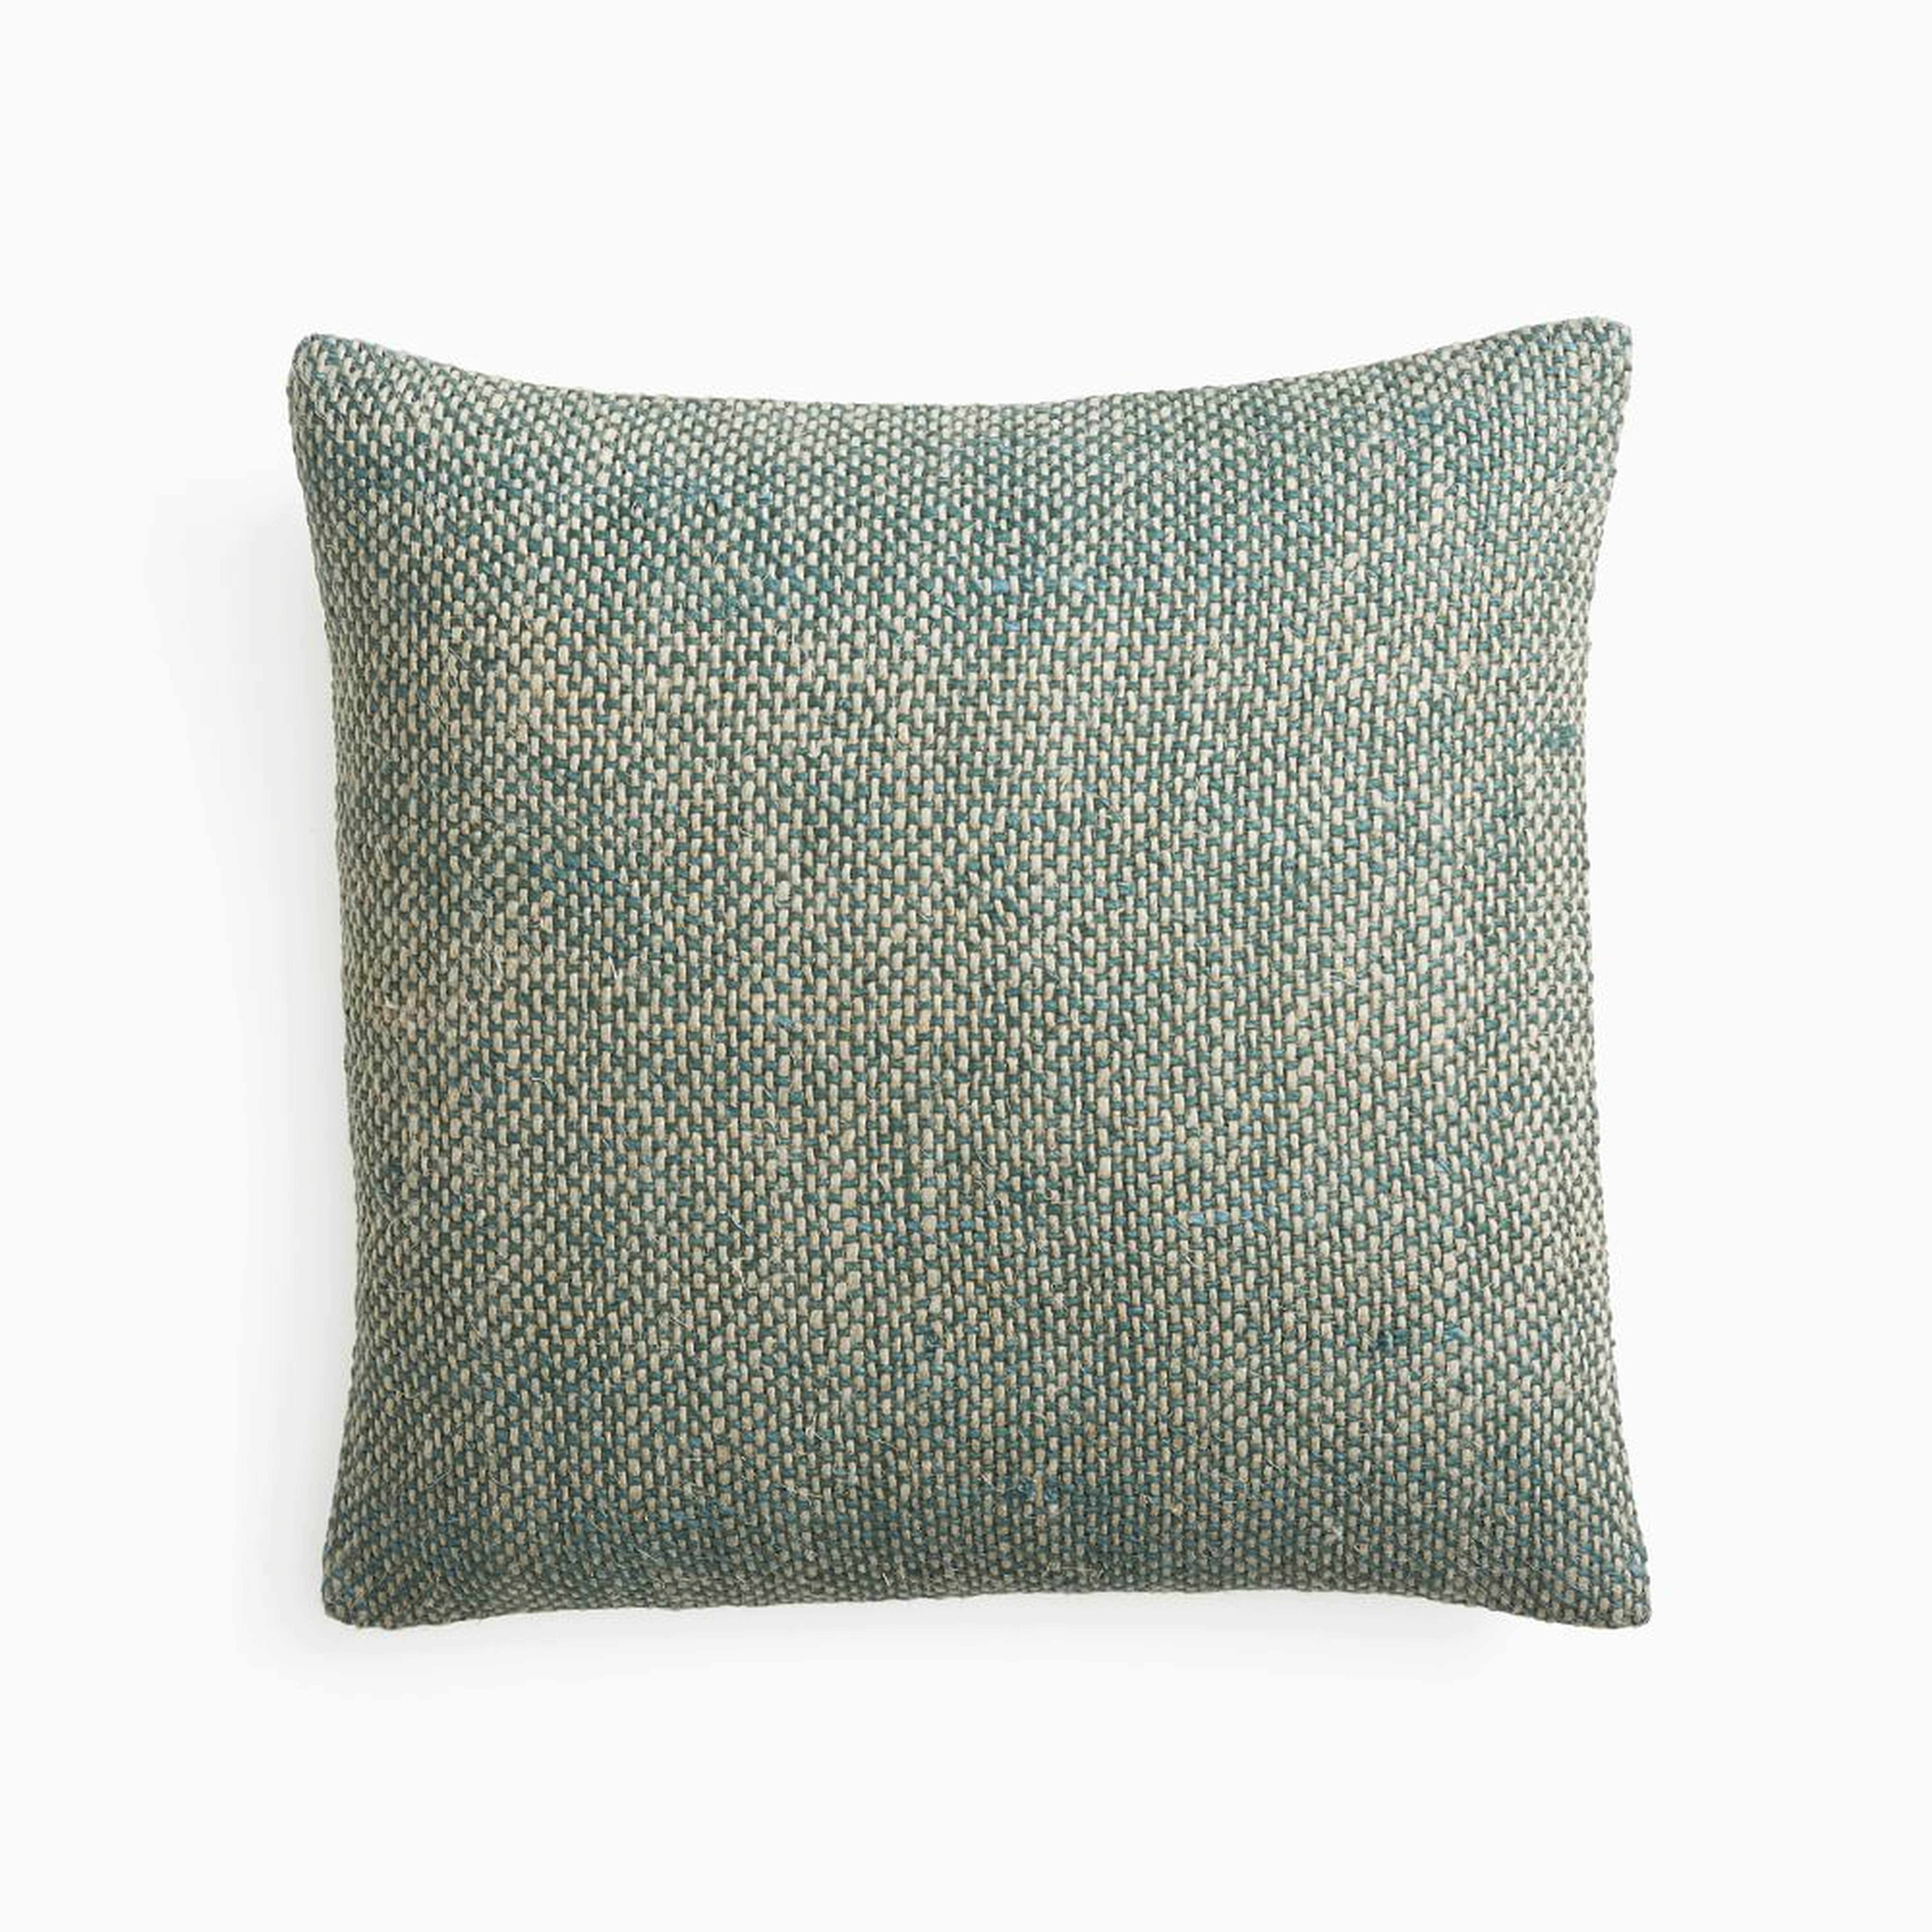 Two Tone Chunky Linen Pillow Cover, 20"x20", Light Silver Pine - West Elm